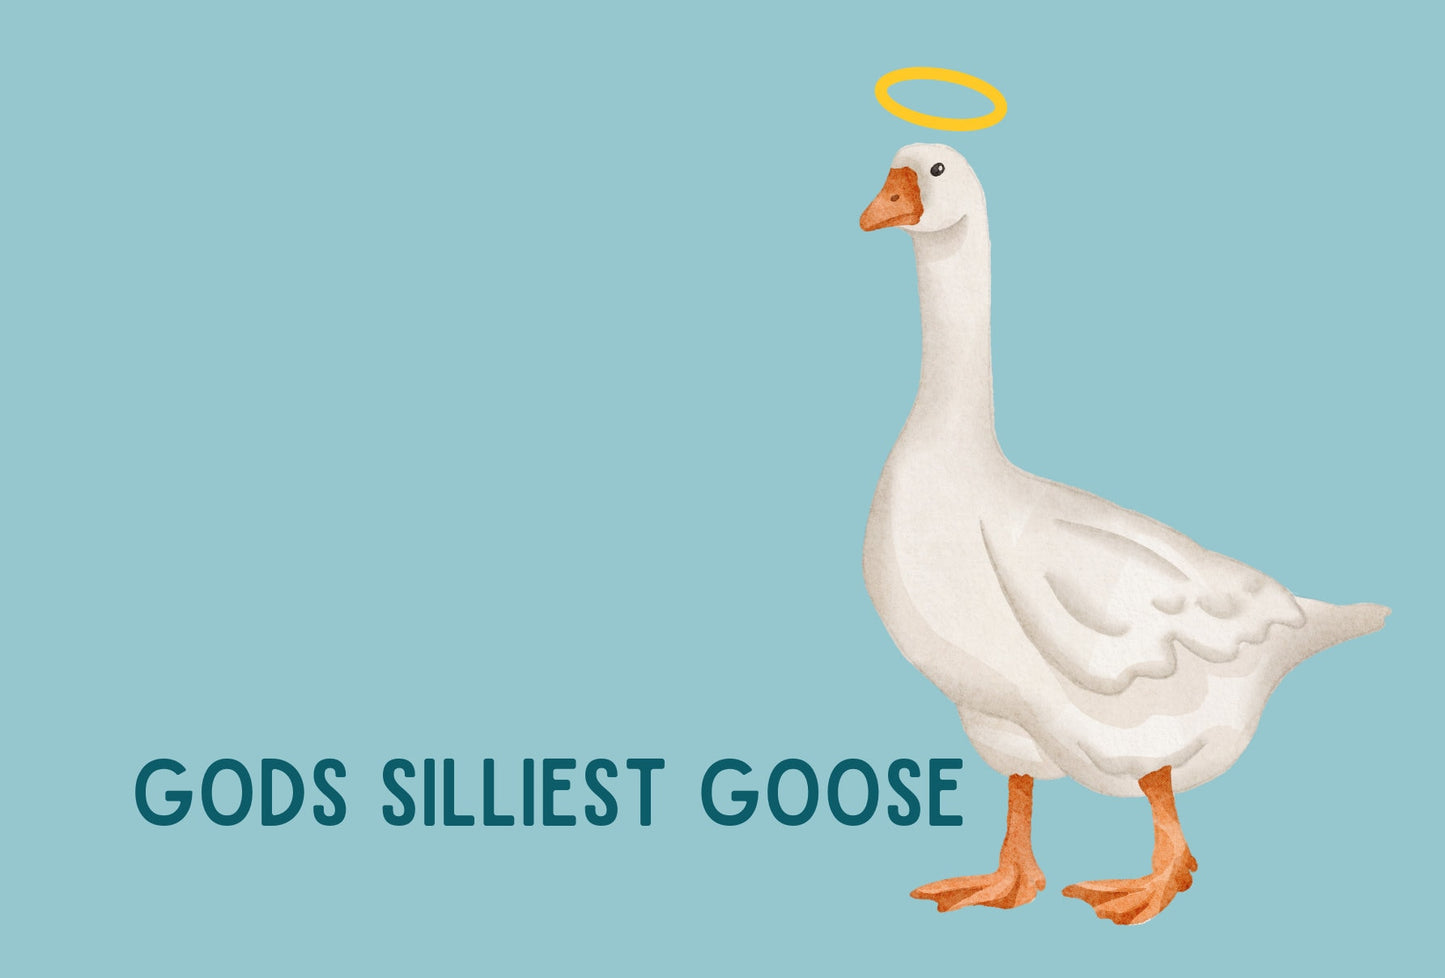 Silly Goose Credit card sticker, Funny Credit Card Skin, Card Wrap Sticker, Mom Gift, Debit card skin, debit card sticker,  Goose Sticker